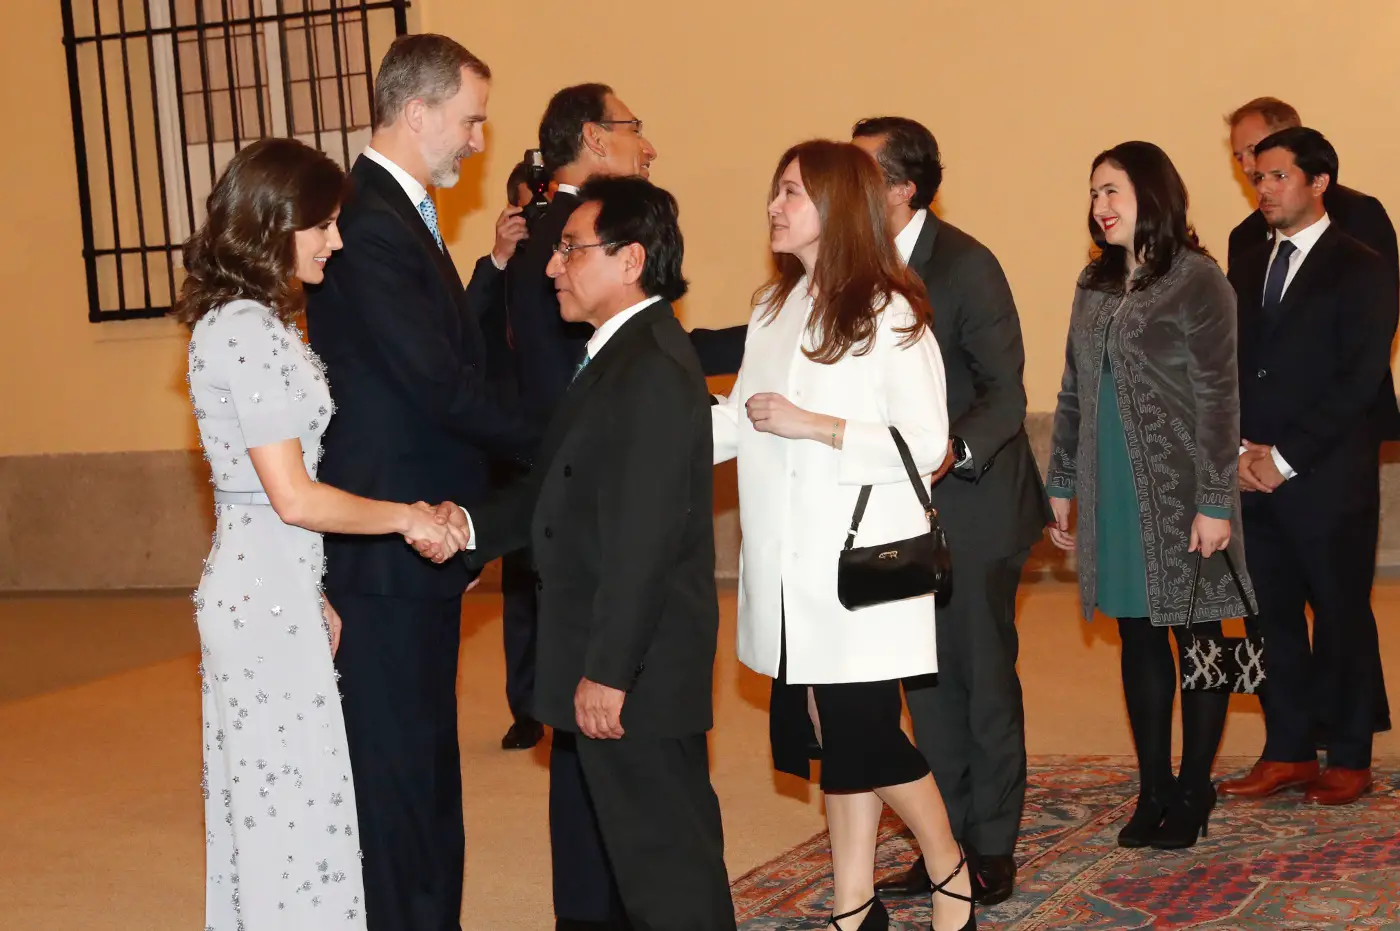 Queen Letizia wore a dove grey cocktail dress by Nina Ricci at the Peru Reception